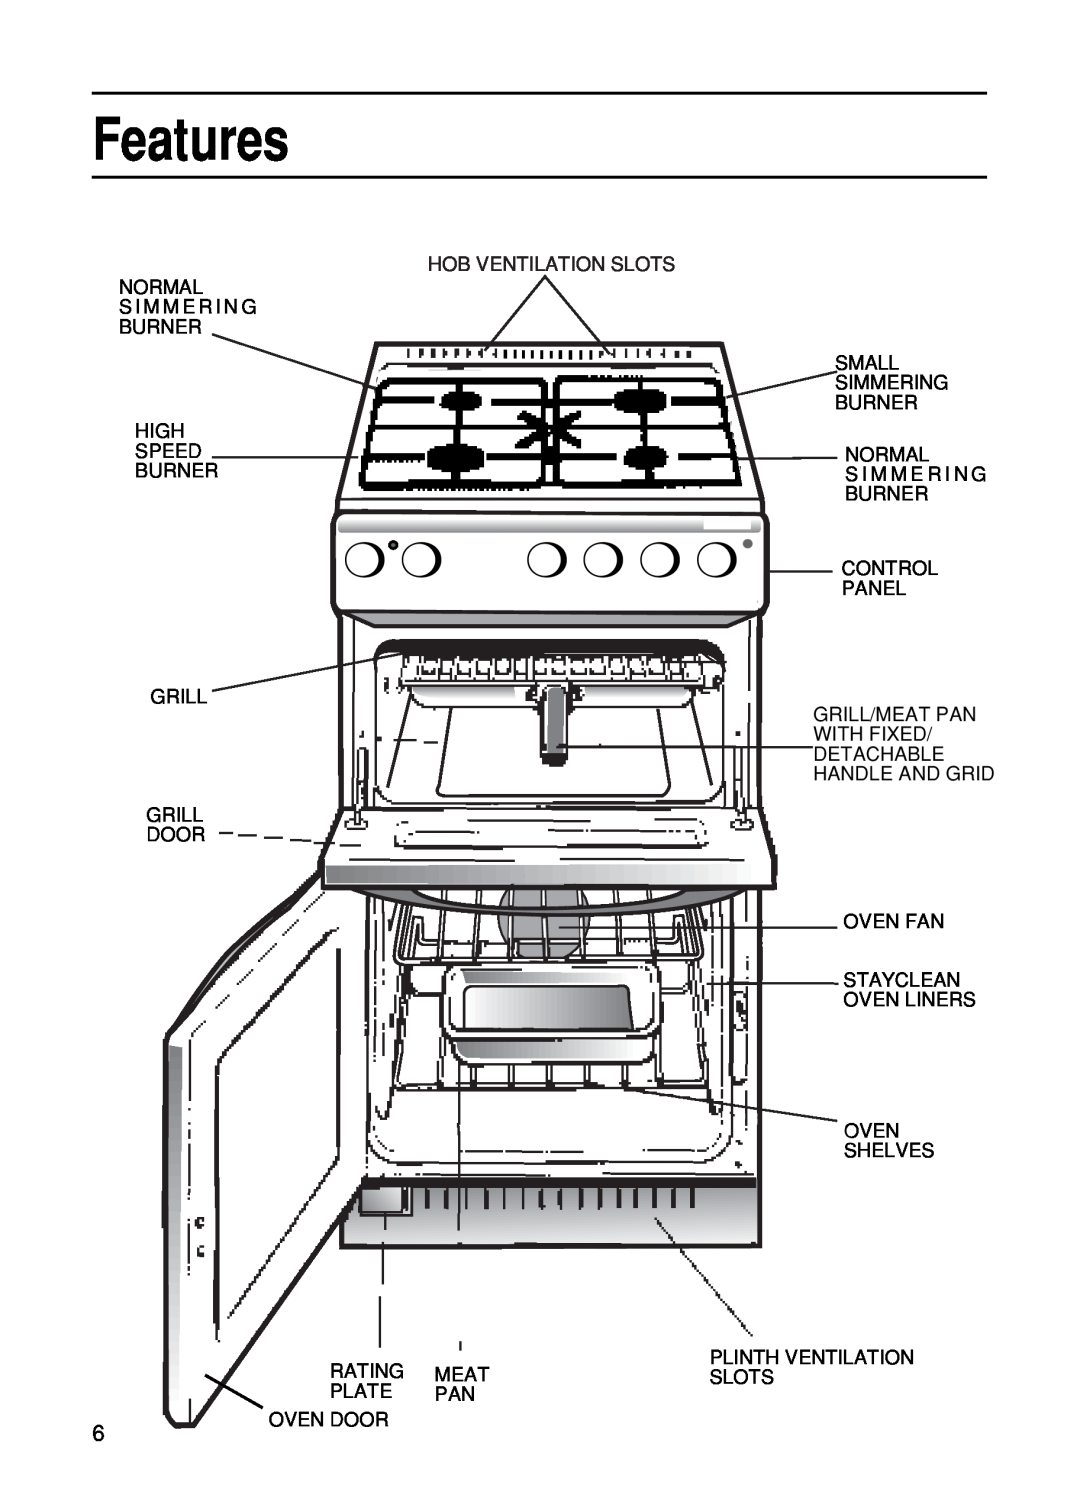 Hotpoint EG21 manual Features 